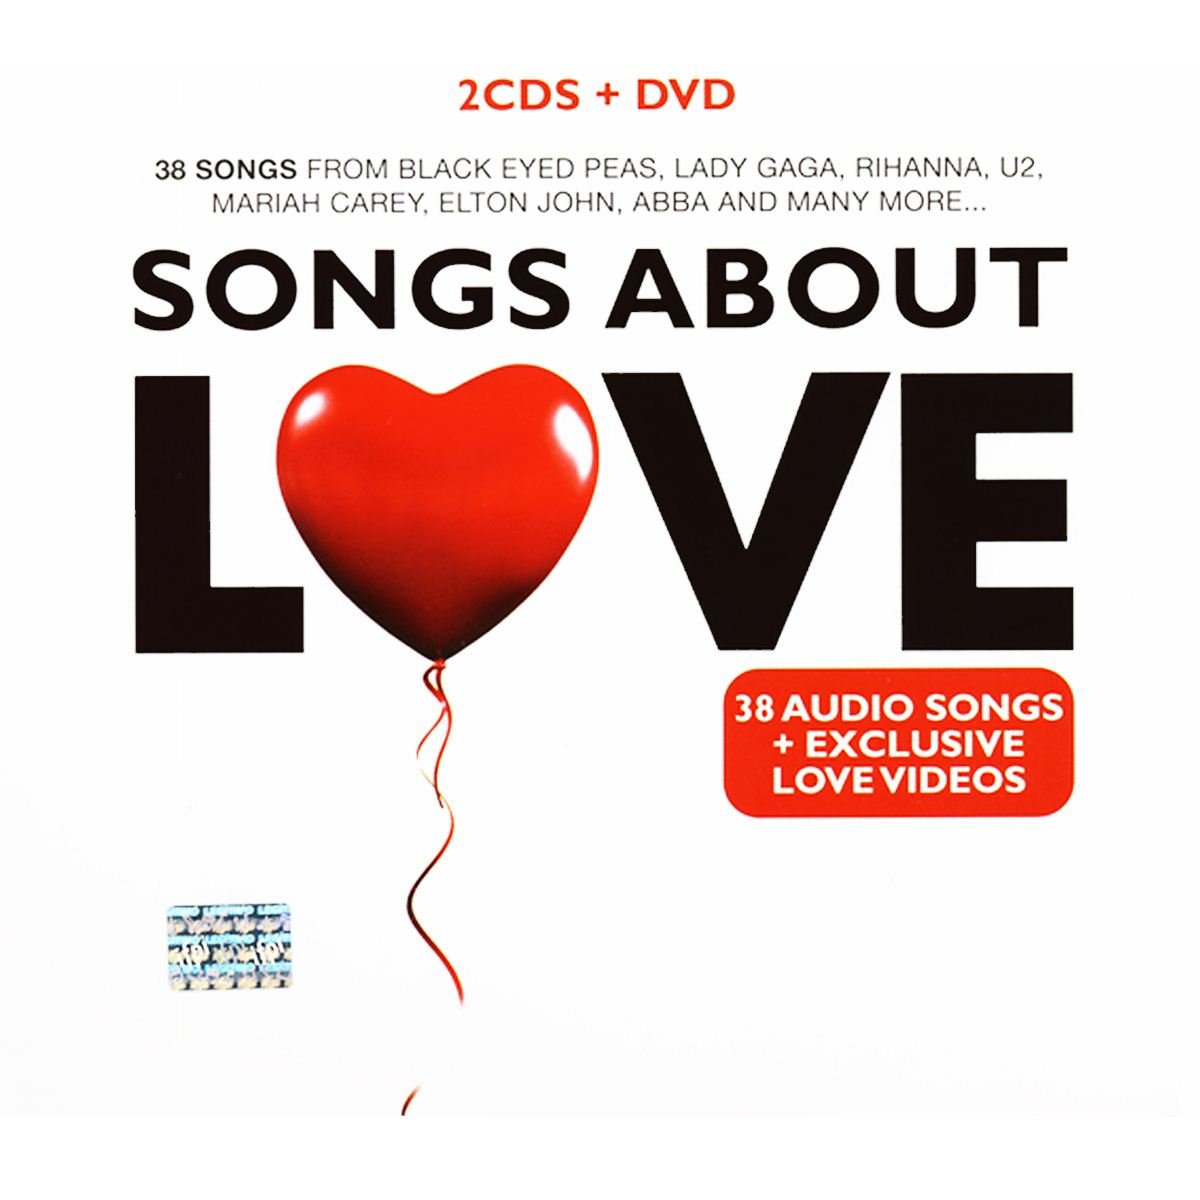 CD2/ DVD Songs About Love